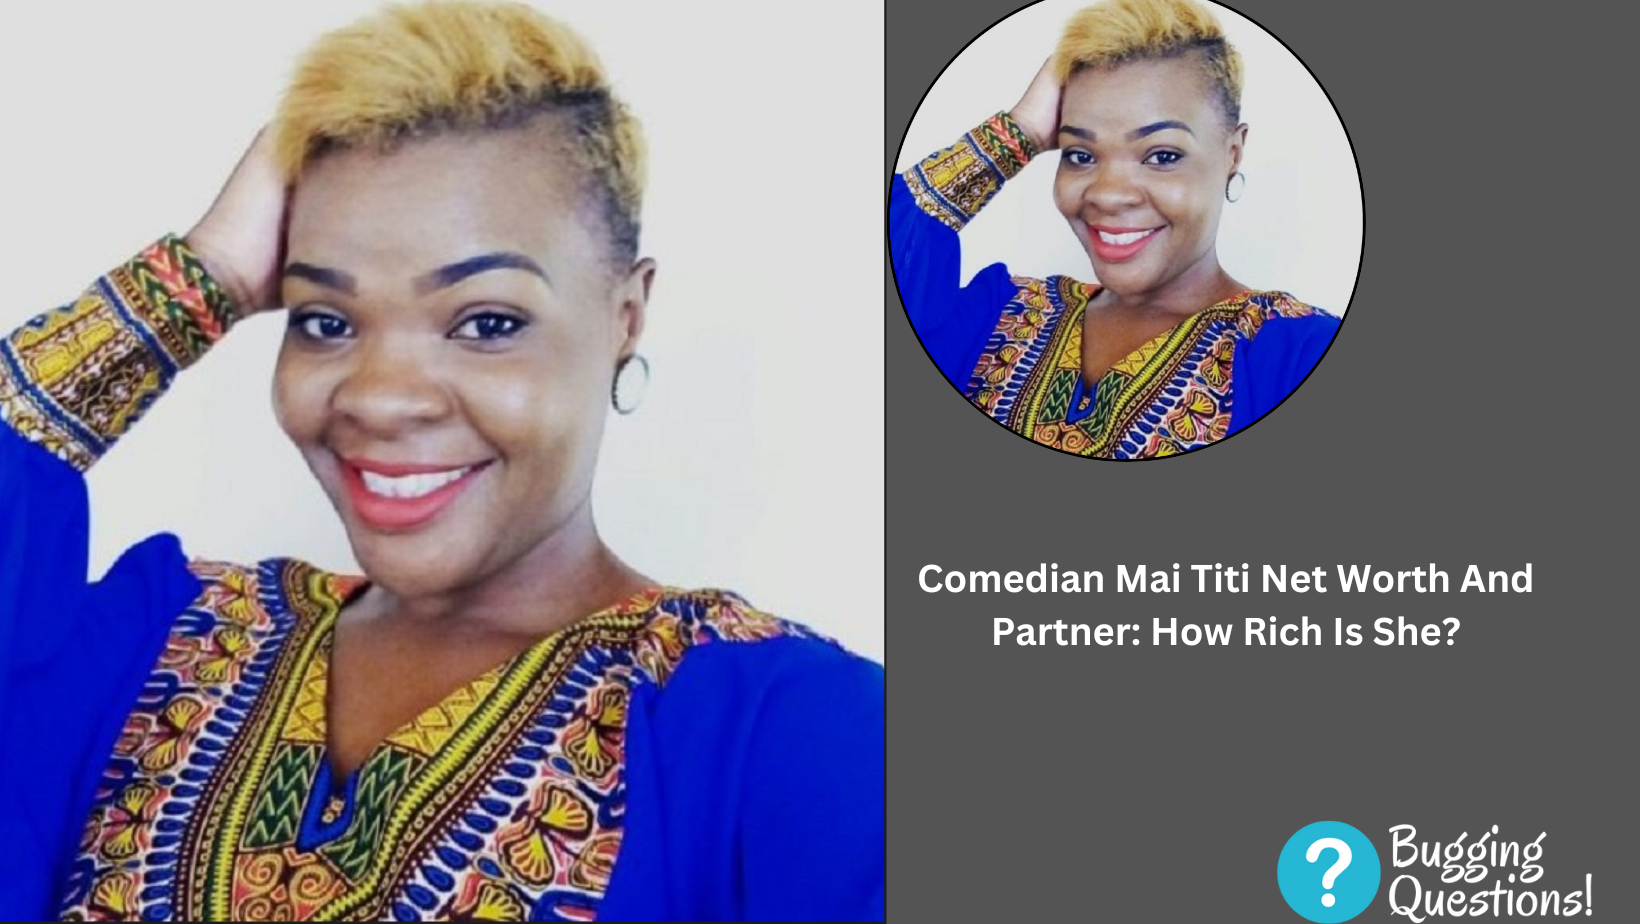 Comedian Mai Titi Net Worth And Partner: How Rich Is She?